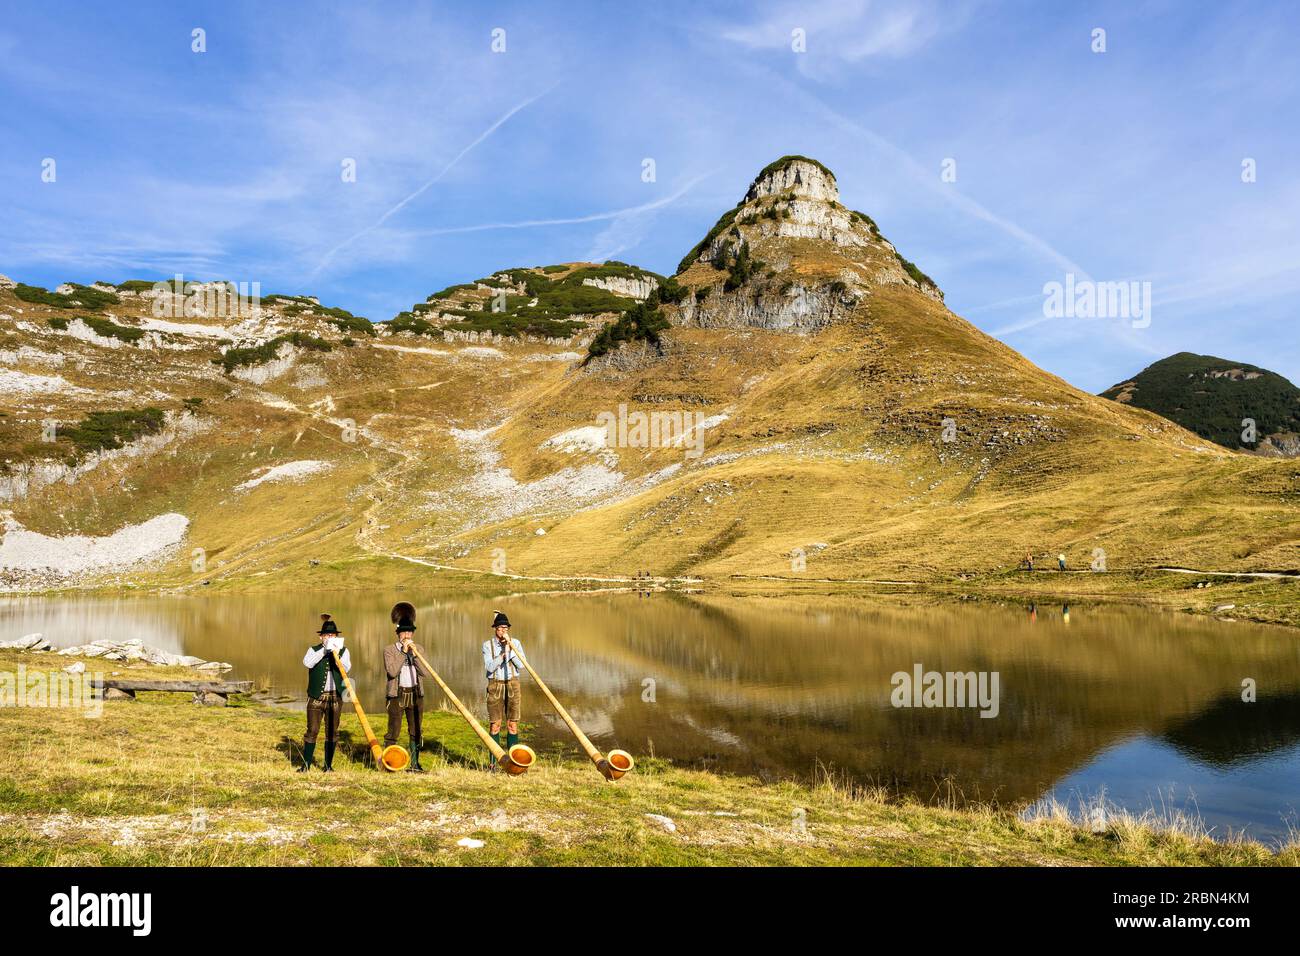 Three Austrian alphorn musicians named "Klangholz" playing alphorn at lake Augstsee on mount Loser in Austria. Stock Photo